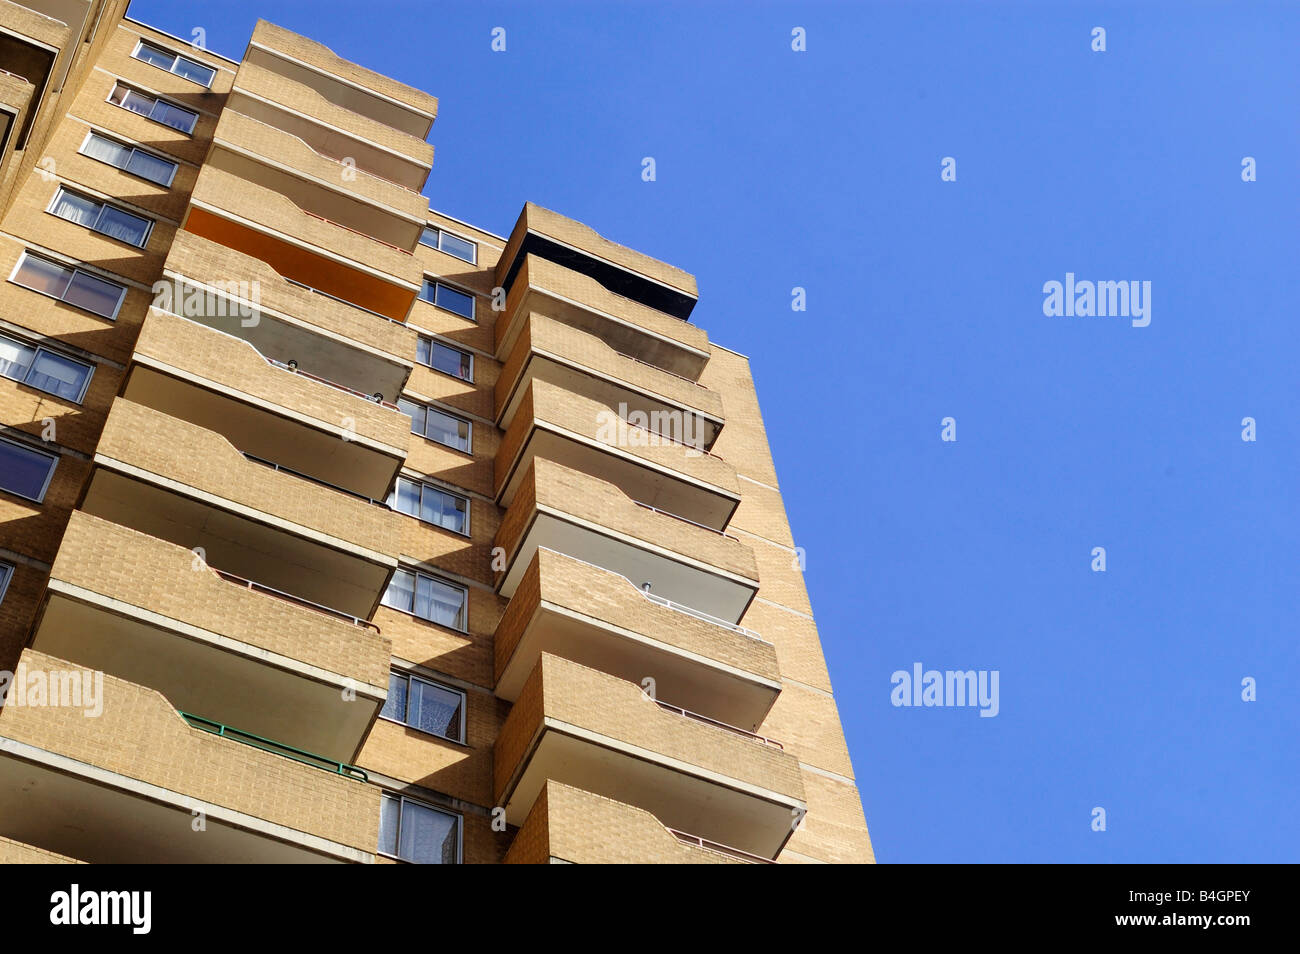 Balconies on a Tower Block London Britain Stock Photo